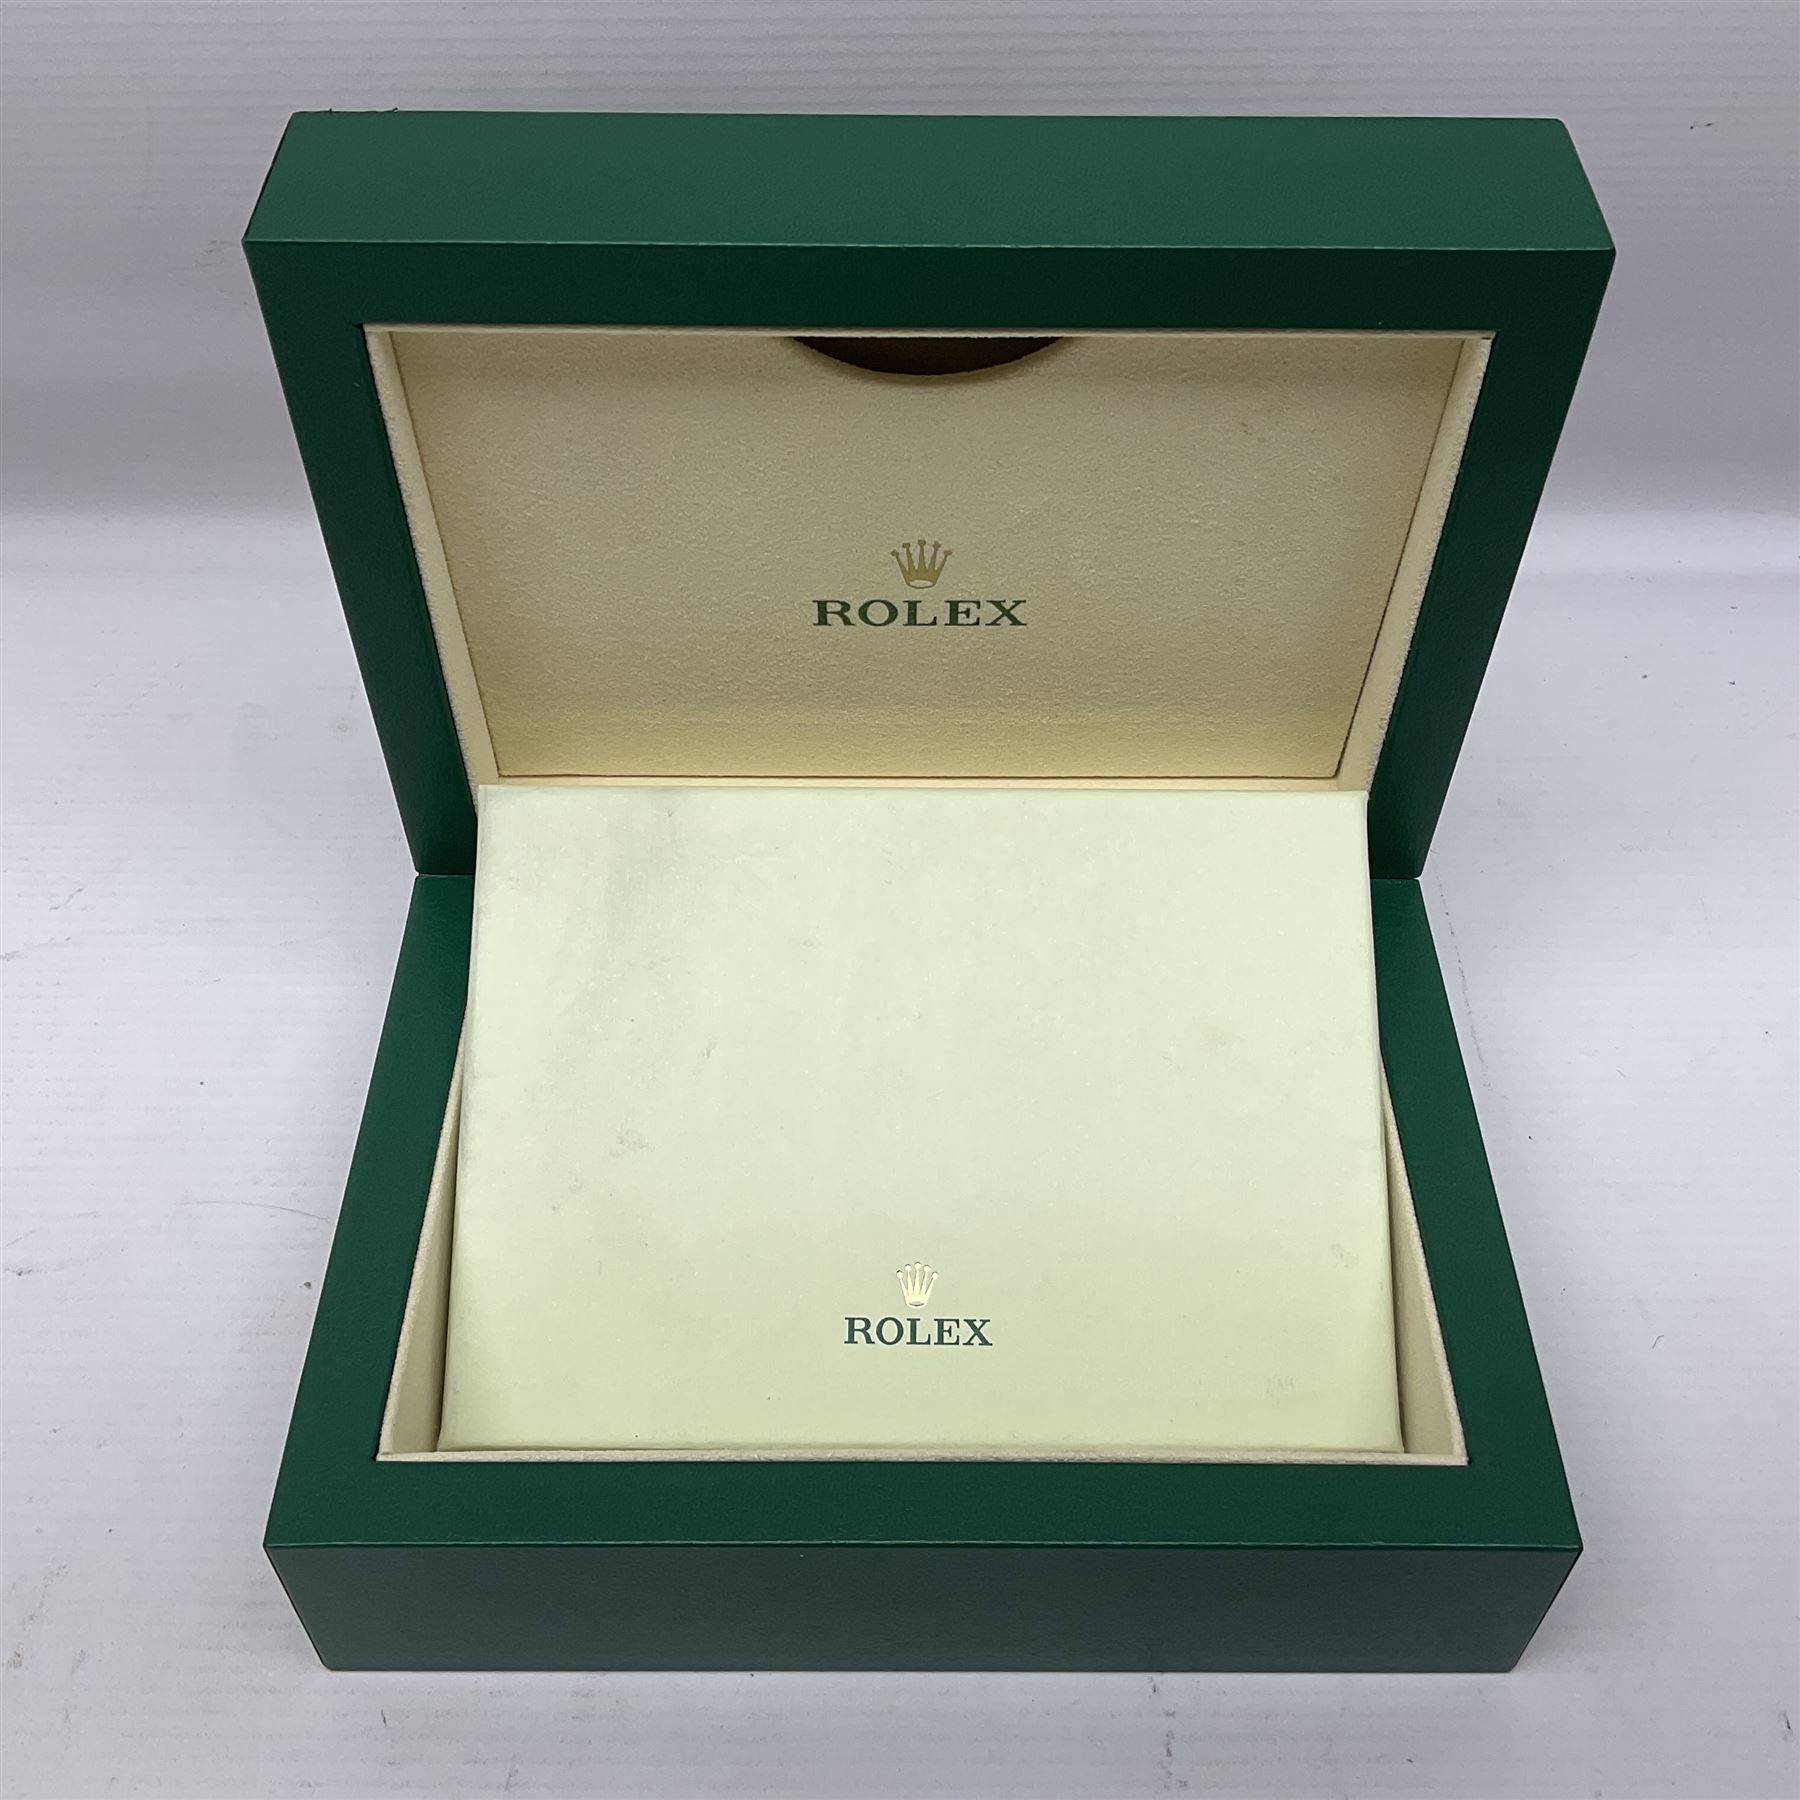 Rolex green leather box - Image 2 of 6